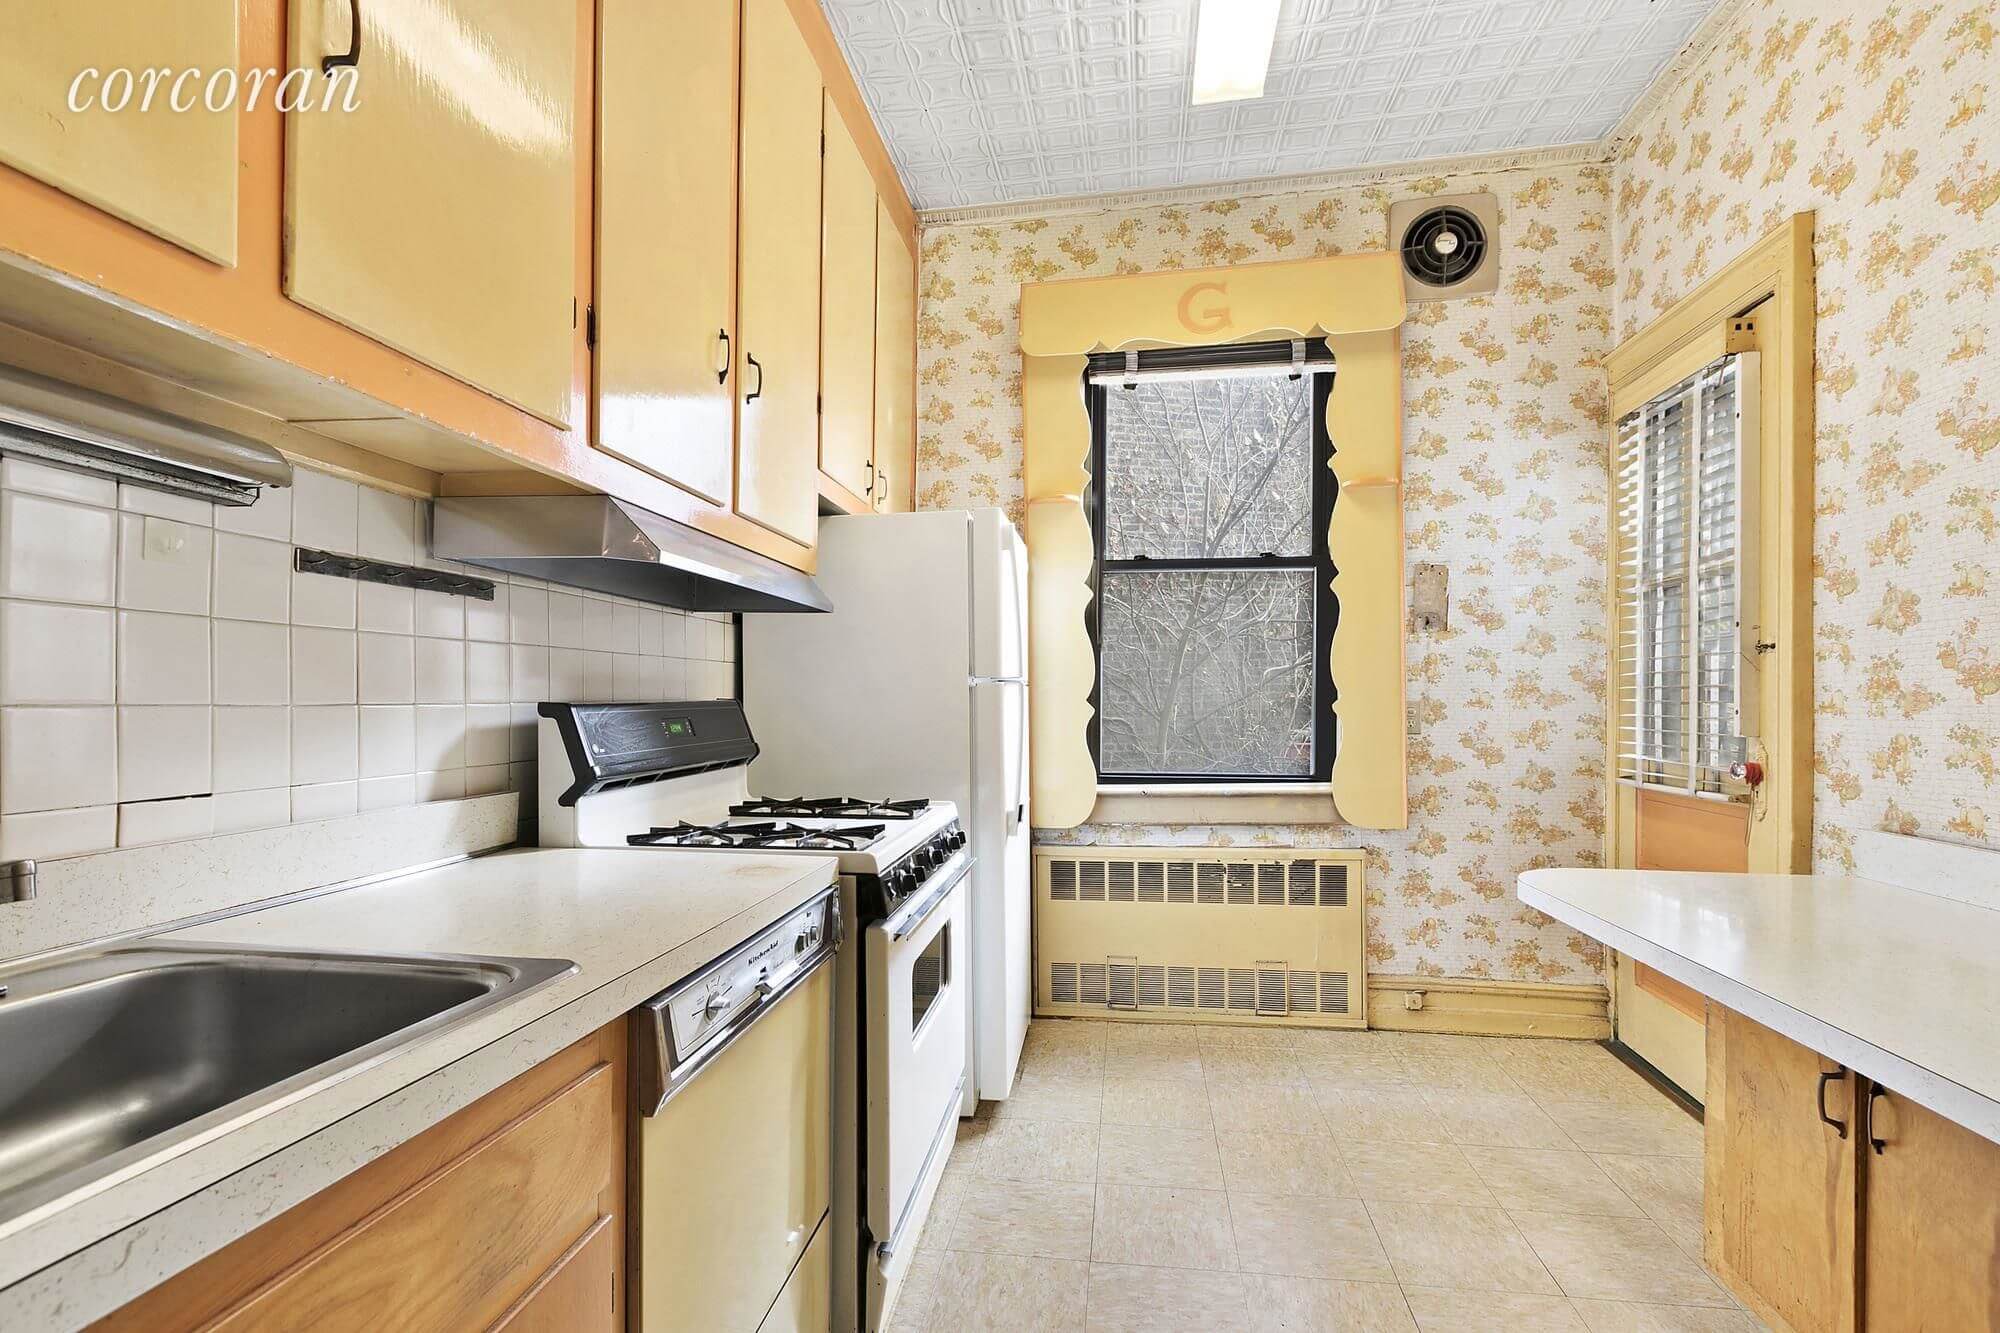 Brooklyn Homes for Sale in Borough Park at 4615 11th Avenue